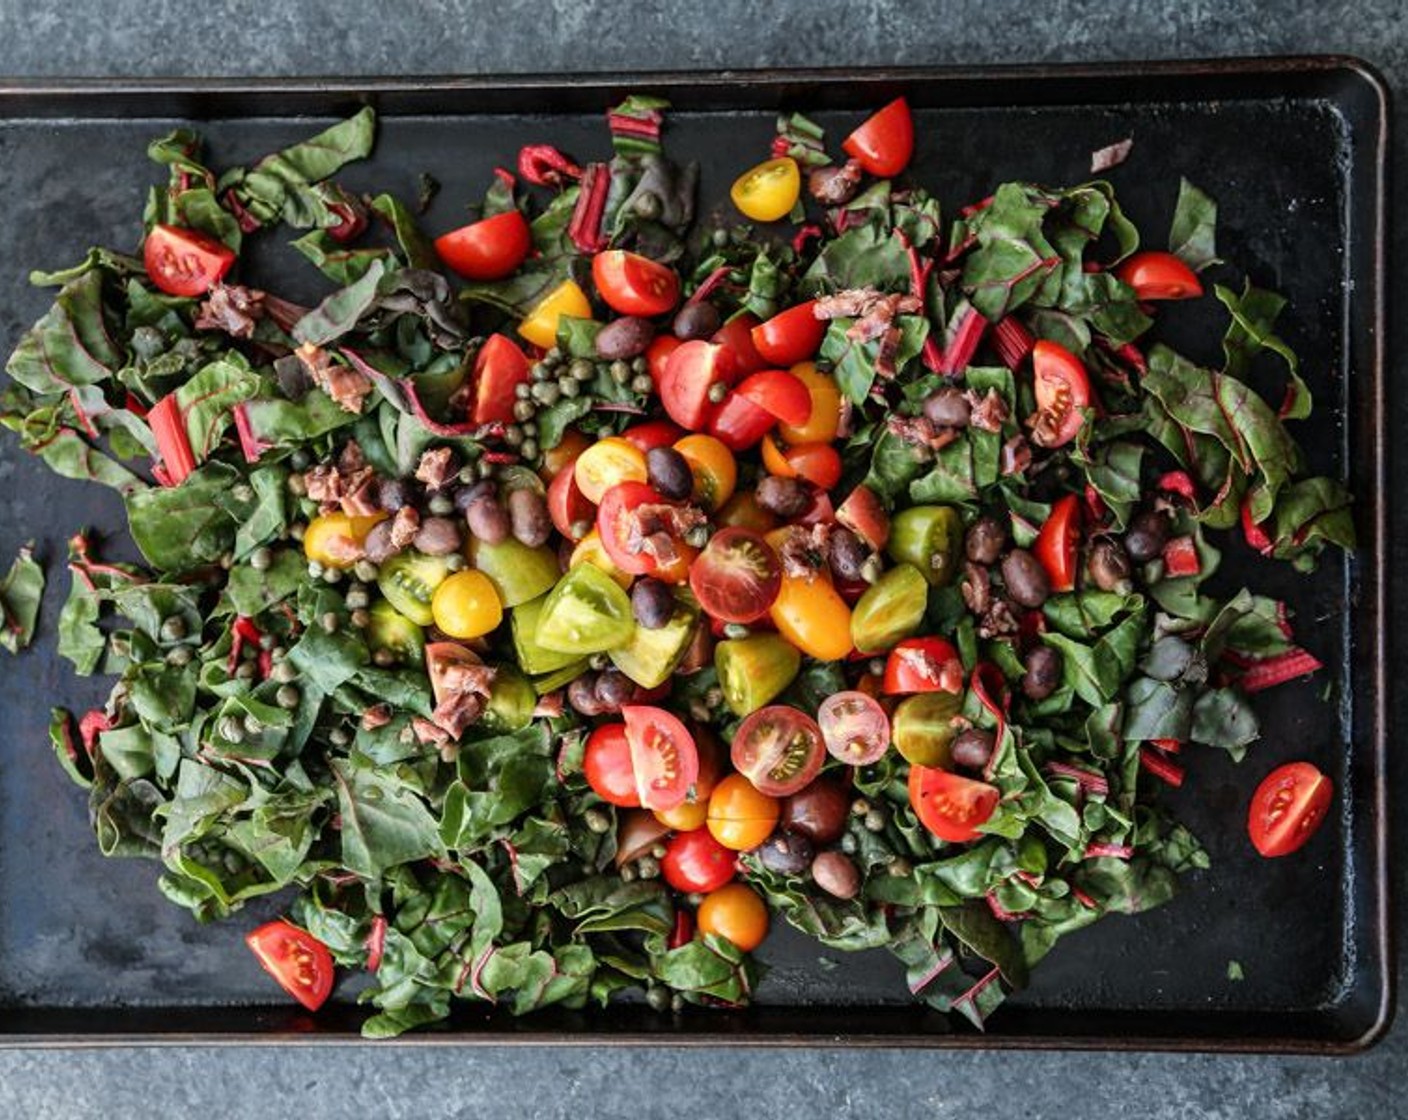 step 2 On a large rimmed baking sheet, toss the Red Chard (1 bunch), Cherry Tomatoes (4 cups), Shallot (1), Garlic (2 cloves), Kalamata Olives (1/4 cup), Anchovy Fillets (2), Capers (1 Tbsp), Olive Oil (1/4 cup), and Sea Salt (1/2 tsp) until combined.